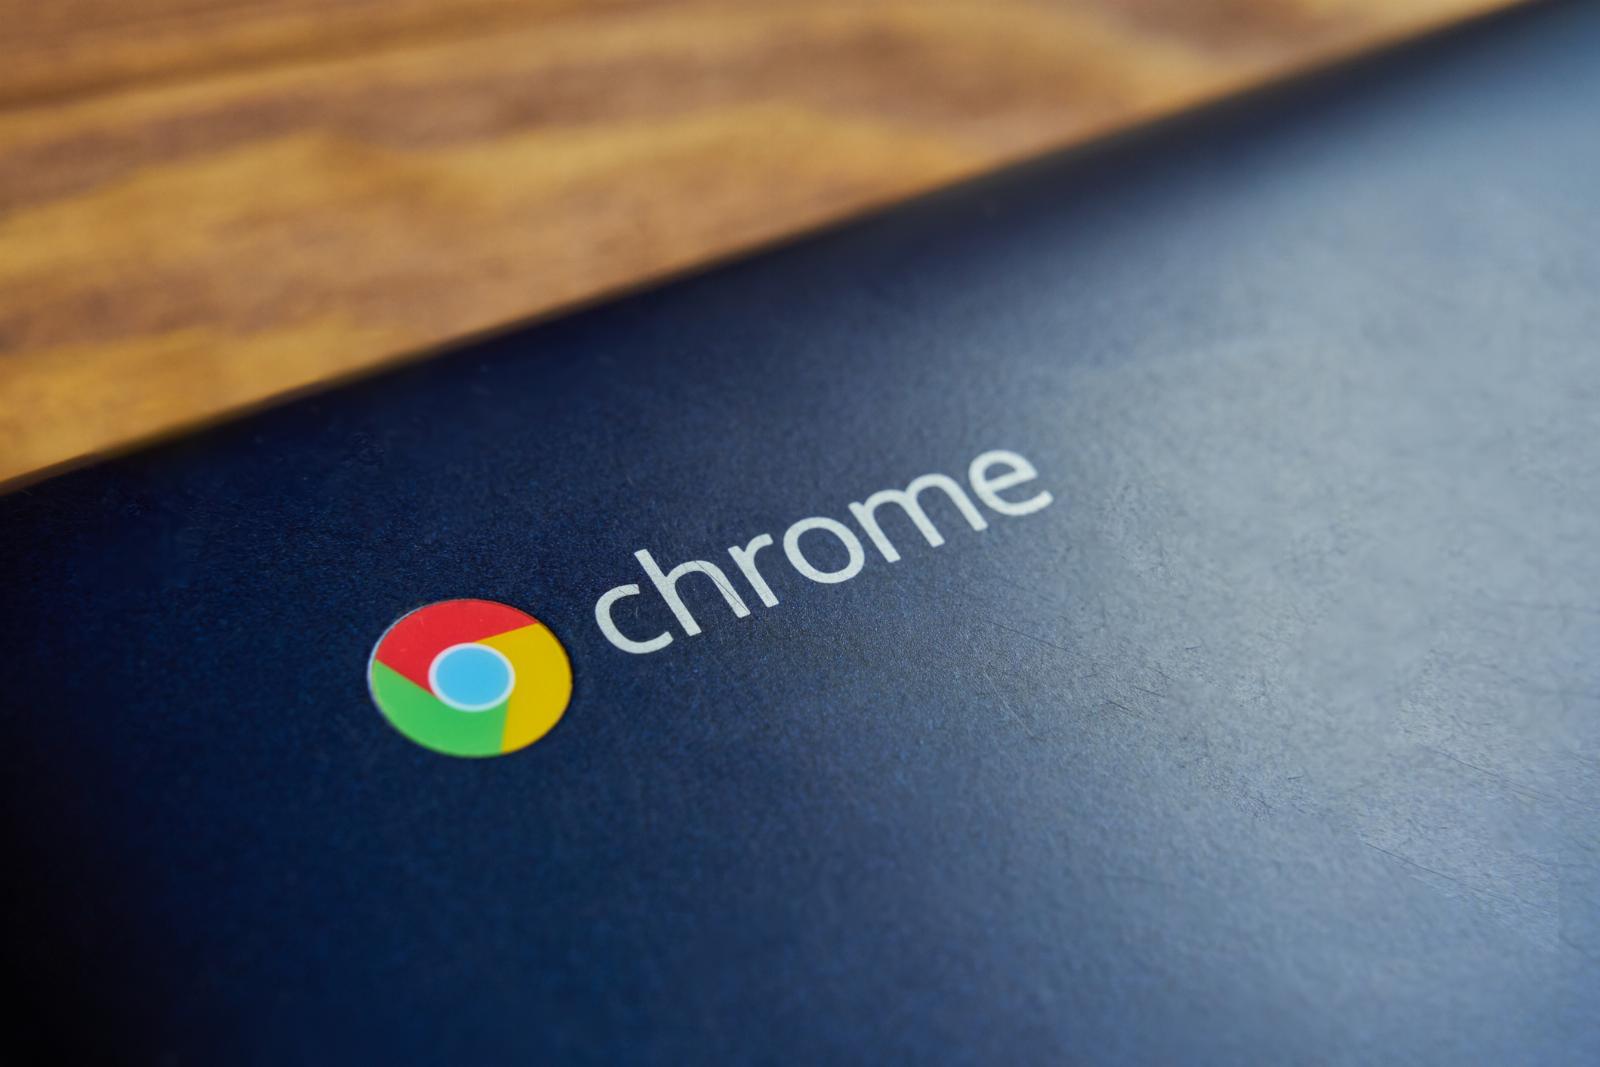 ChromeOS 117 update brings Material You design and a new window organizer